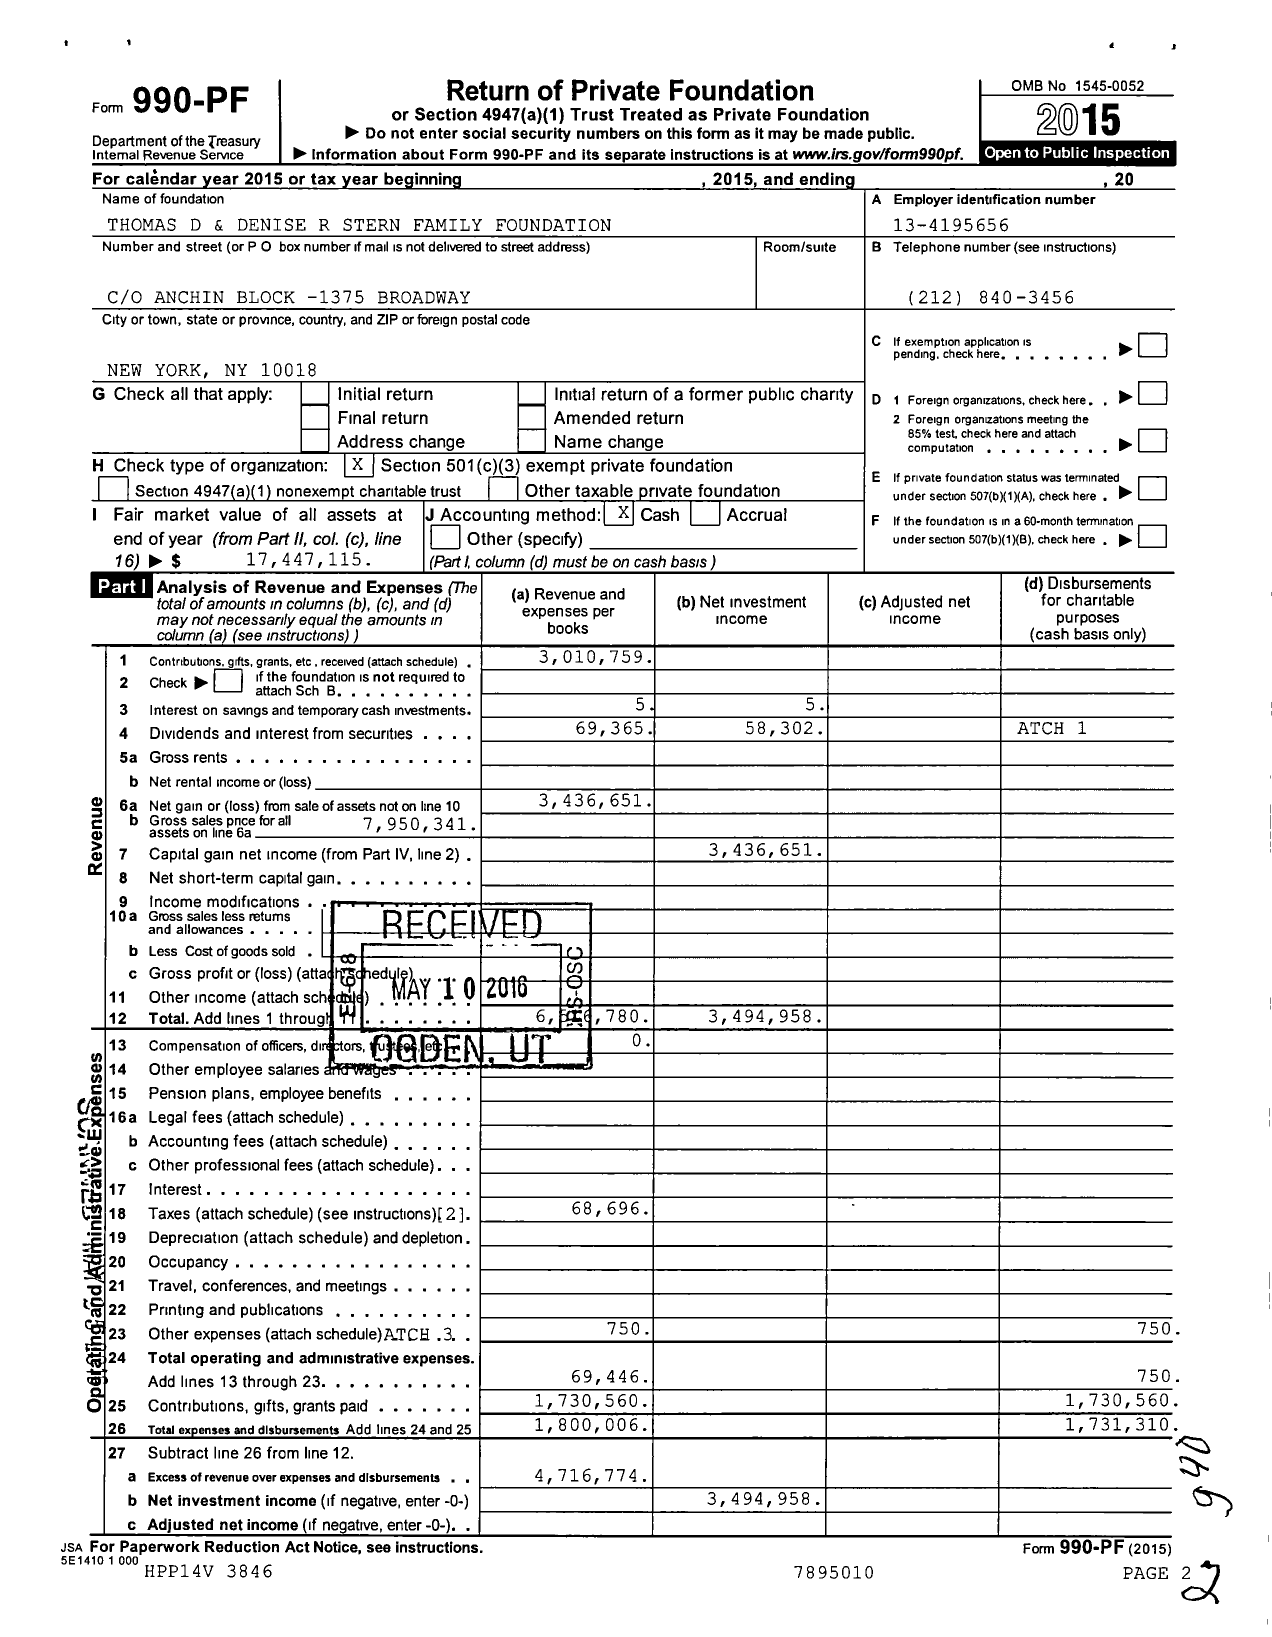 Image of first page of 2015 Form 990PF for Thomas D and Denise R Stern Family Foundation